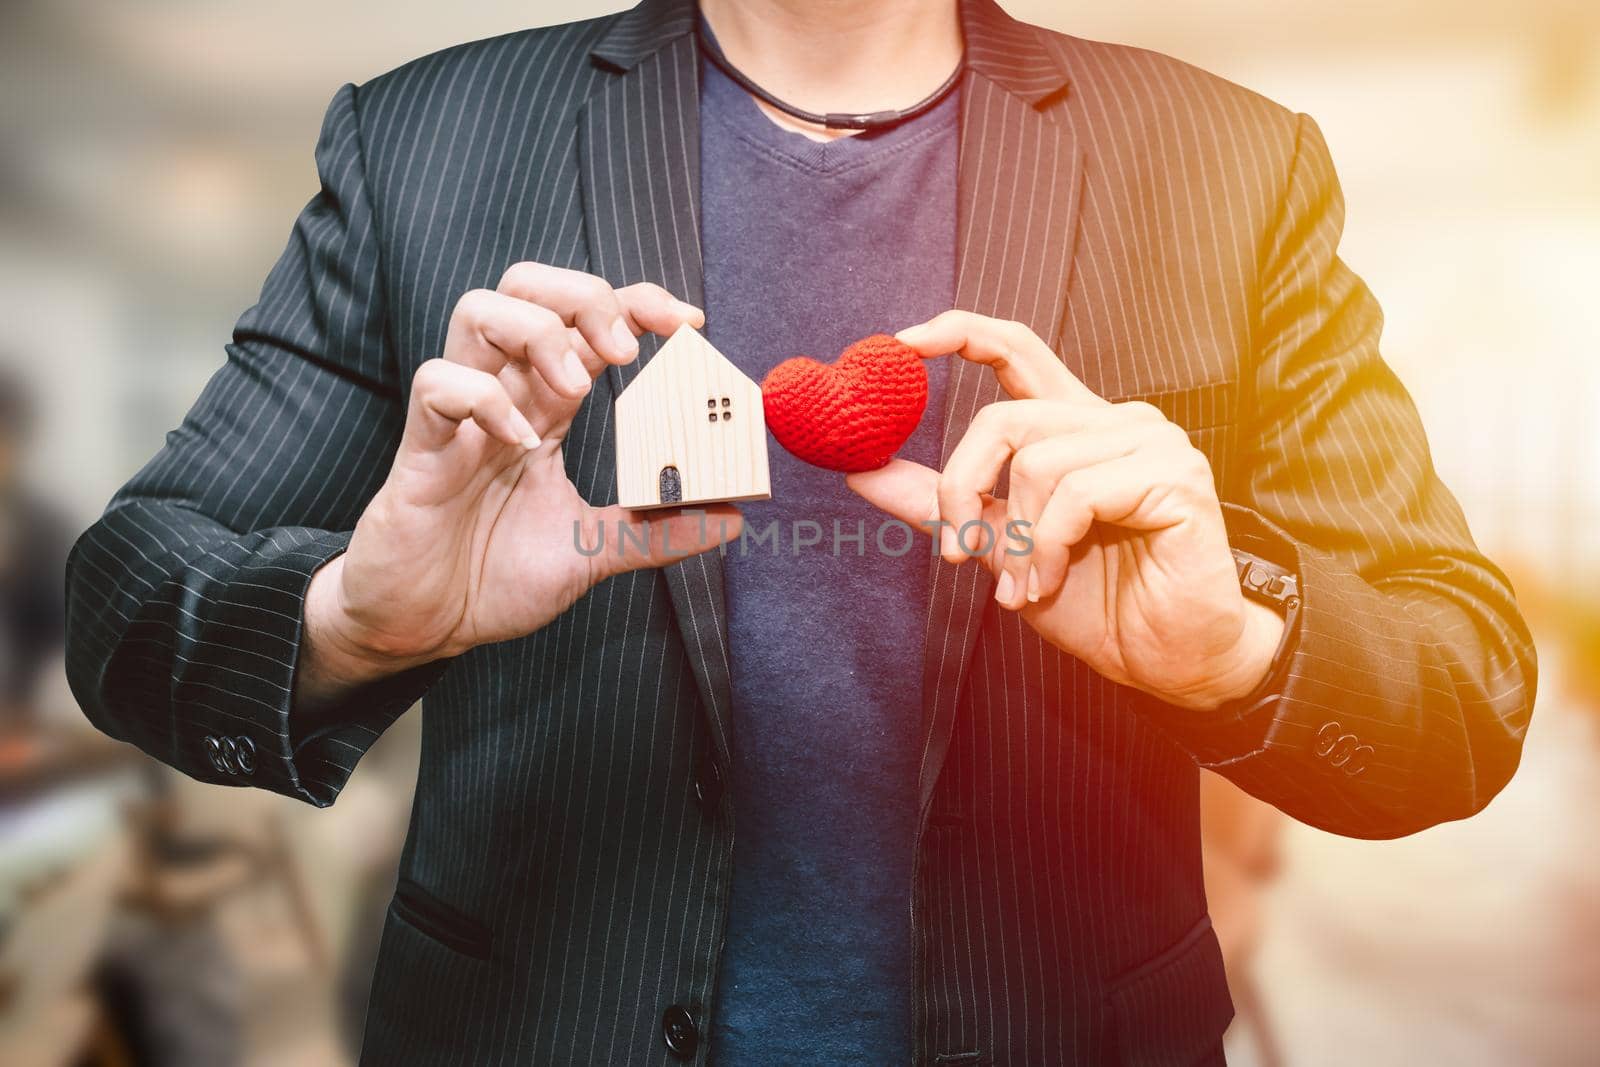 male man hand holding small home and hart sign for love home or business accommodation service concept by qualitystocks